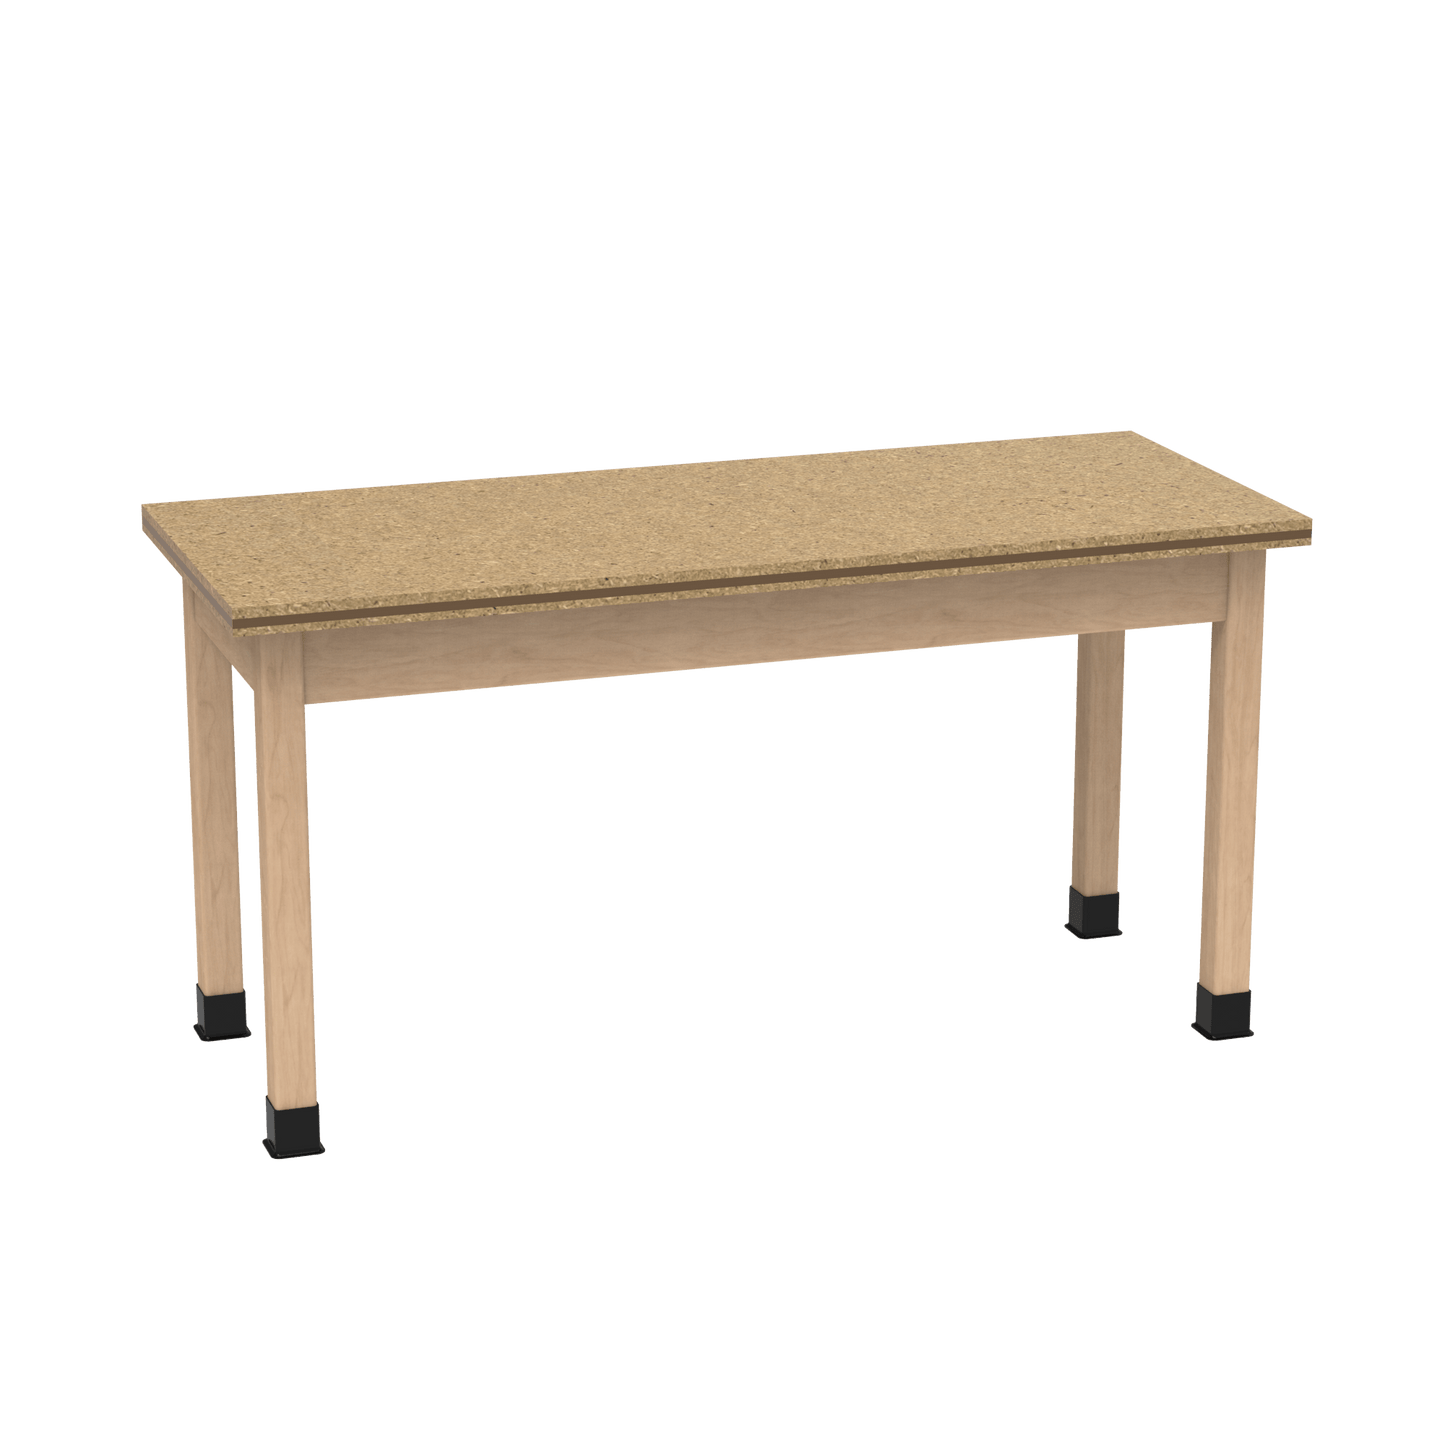 Diversified Woodcrafts Science Table - Plain Apron - 54" W x 24" D - Solid Wood Frame and Adjustable Glides - SchoolOutlet